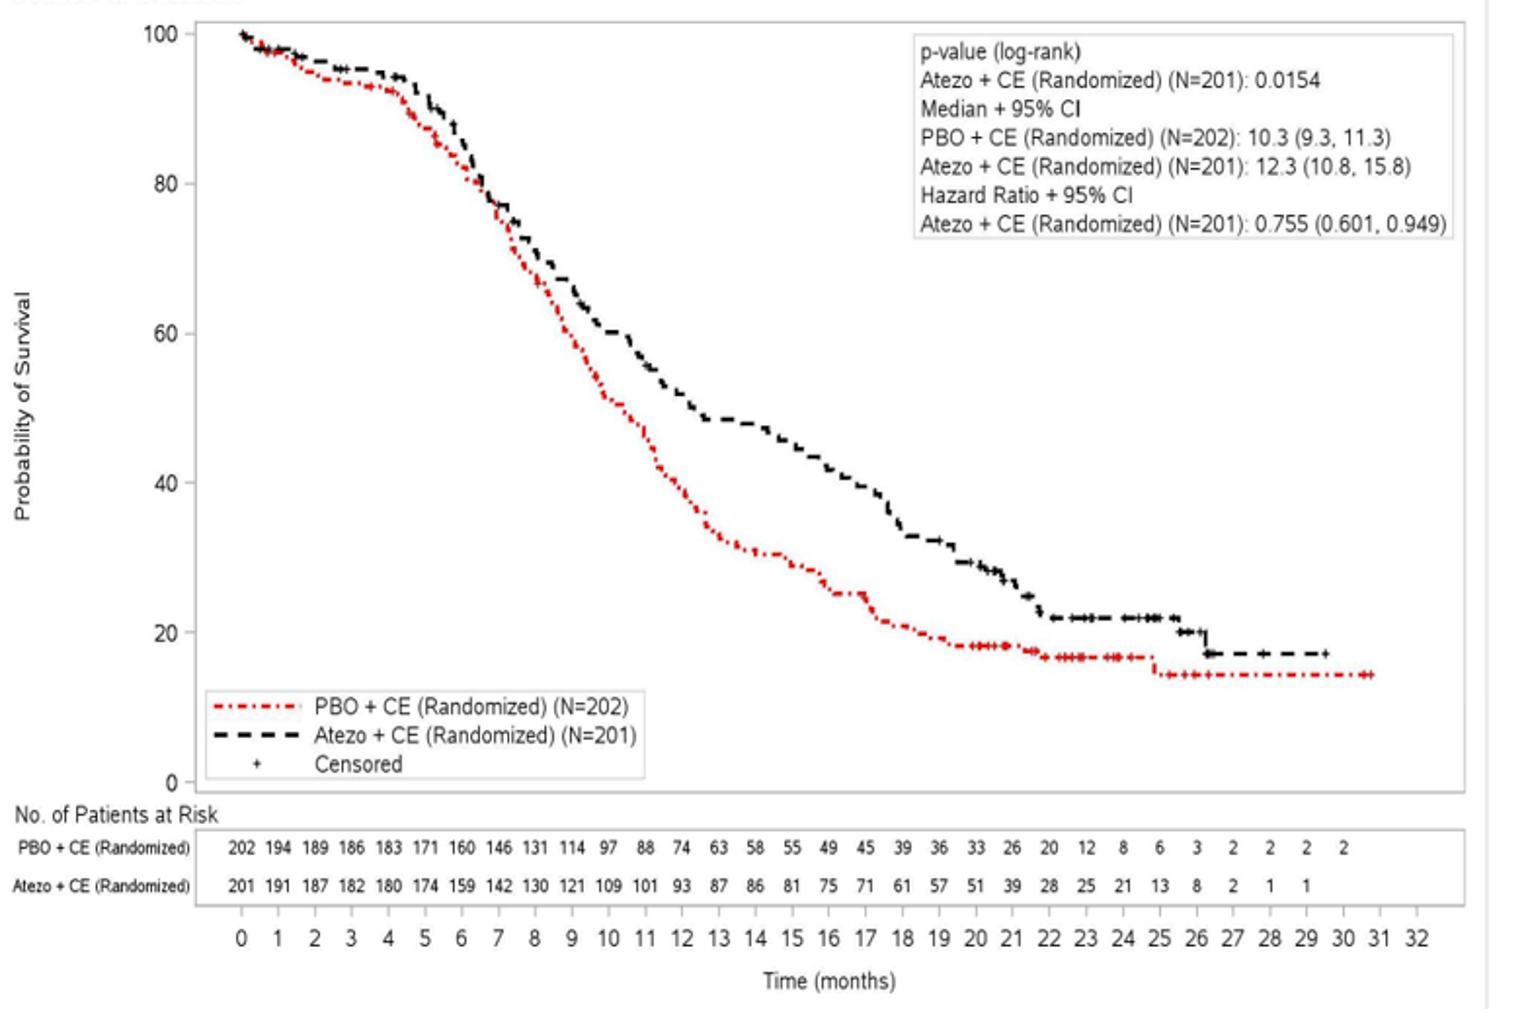 Kaplan–Meier curve for OS with atezolizumab plus carboplatin and etoposide versus placebo plus carboplatin and etoposide, with the x-axis as time after treatment initiation in months and the y-axis as the probability of survival and a follow-up duration of 32 months. Initially, the curves separate slightly, before coming together at 6.5 months. The curves begin to separate again at 7 months, with the probability of survival higher for atezolizumab plus carboplatin and etoposide.